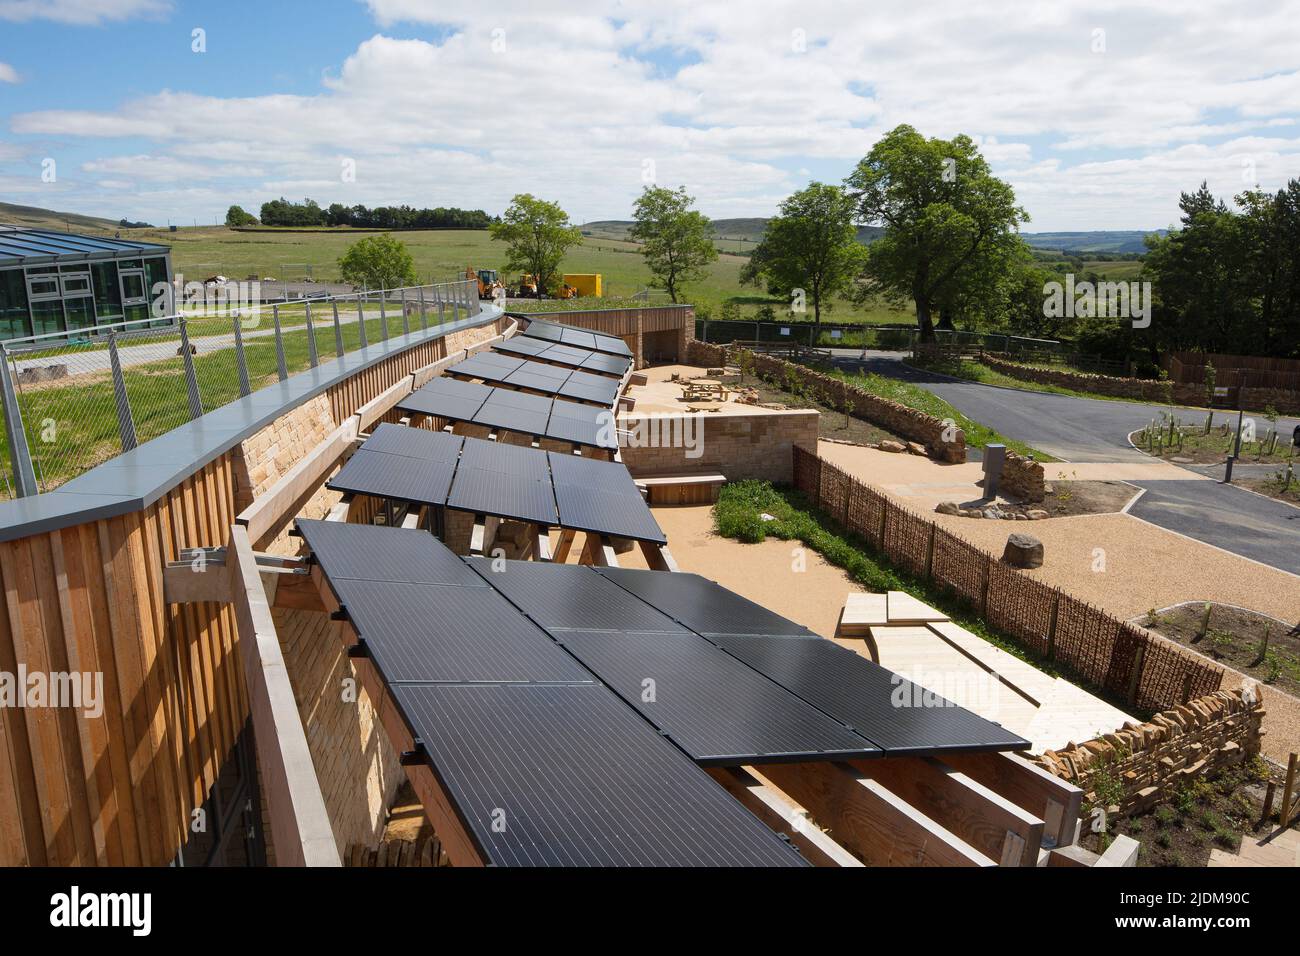 Solar panels on the roof. The Sill Visitors Centre, Once Brewed, Haltwhistle, United Kingdom. Architect: jddk architects, 2017. Stock Photo